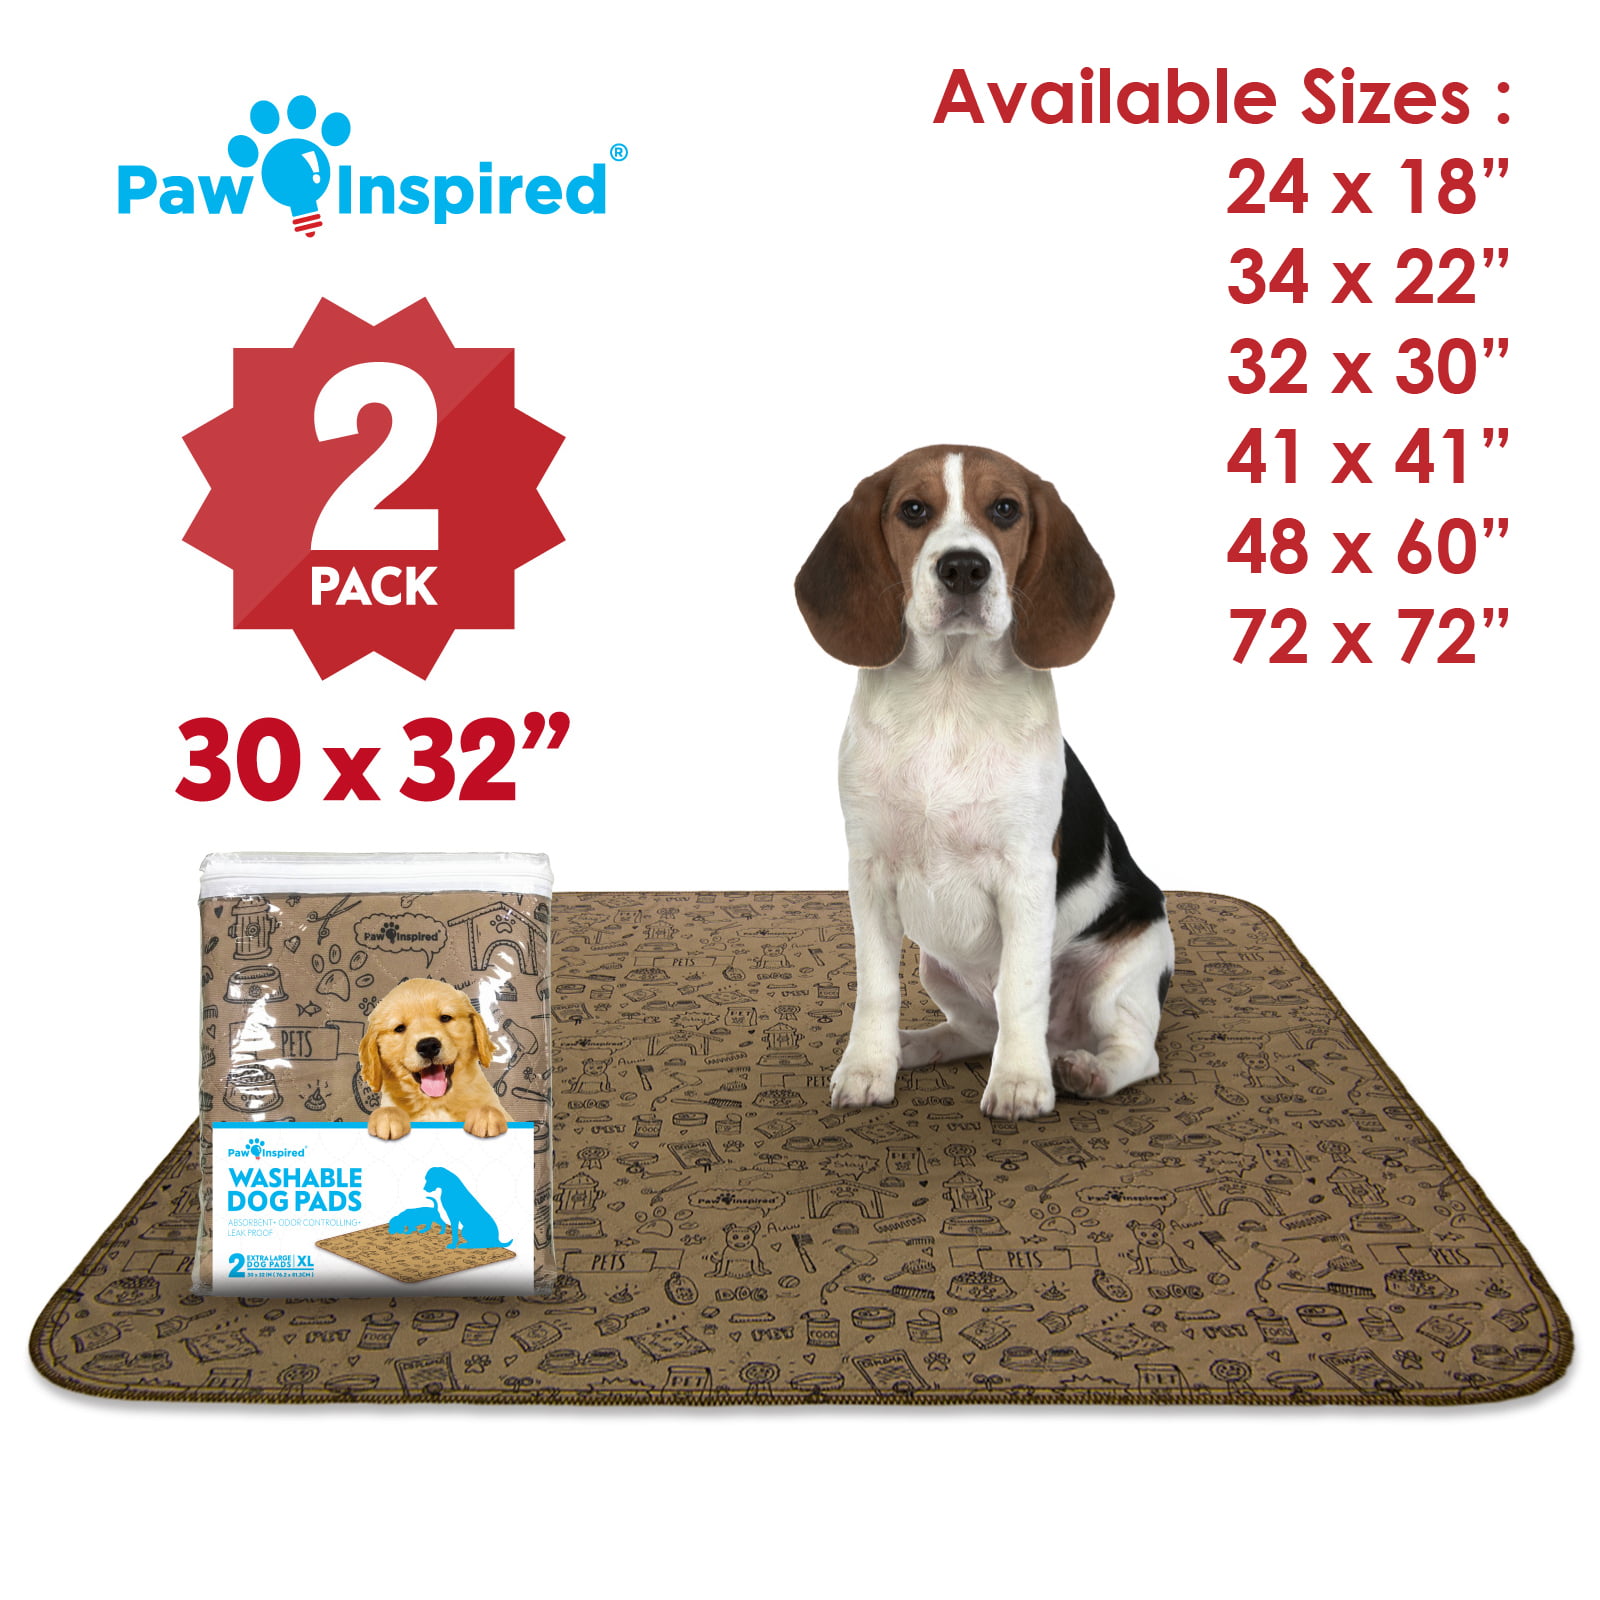 100 30x36 Dog Pet Puppy Training Housebreaking Wee Wee Pee Pads Underpads Piddle 